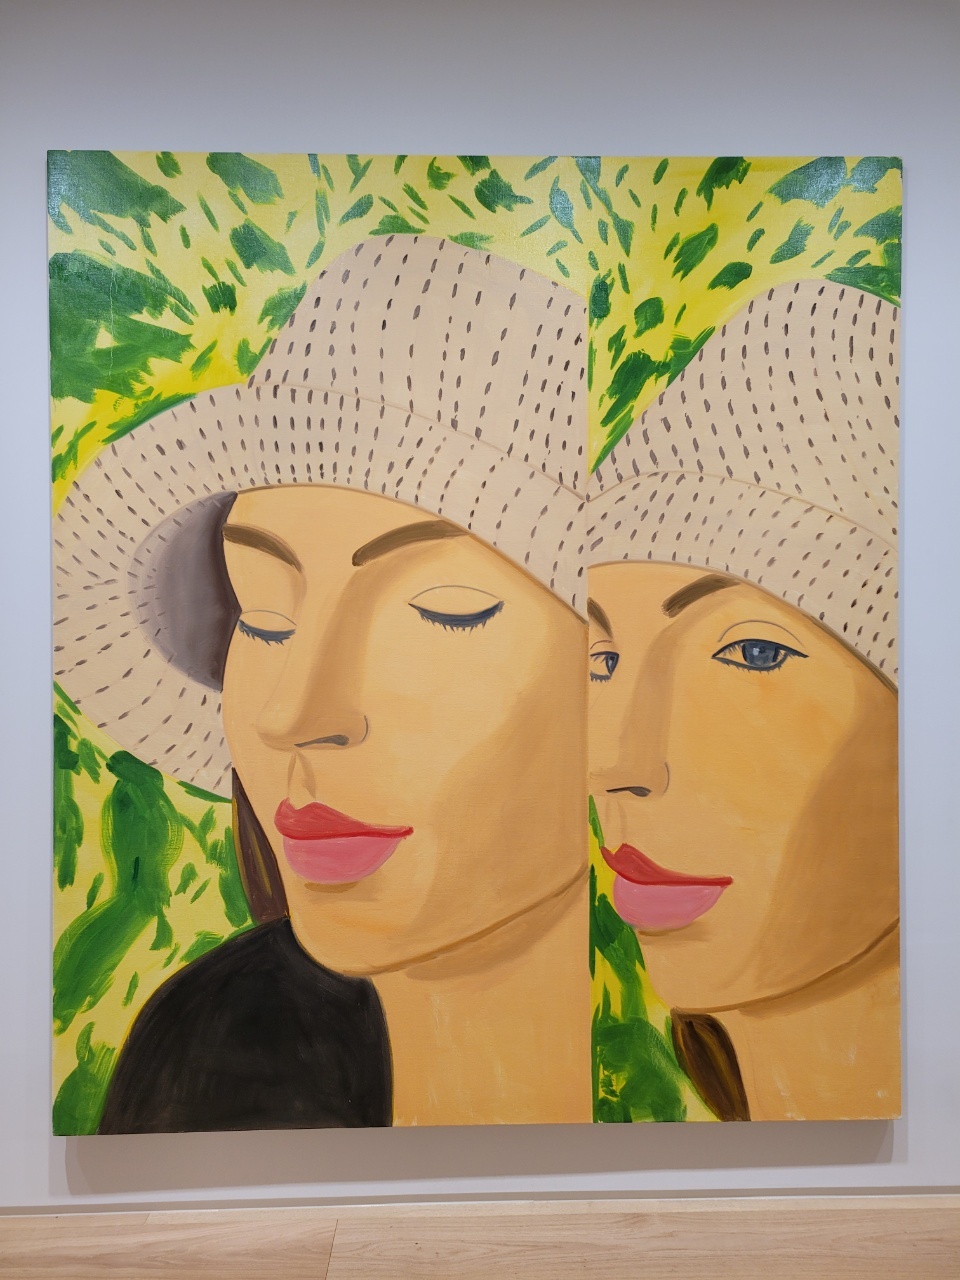 “Straw Hat 3” by Alex Katz is on display at Thaddaeus Ropac gallery as part of the “Flowers” exhibition. (Park Yuna/The Korea Herald)